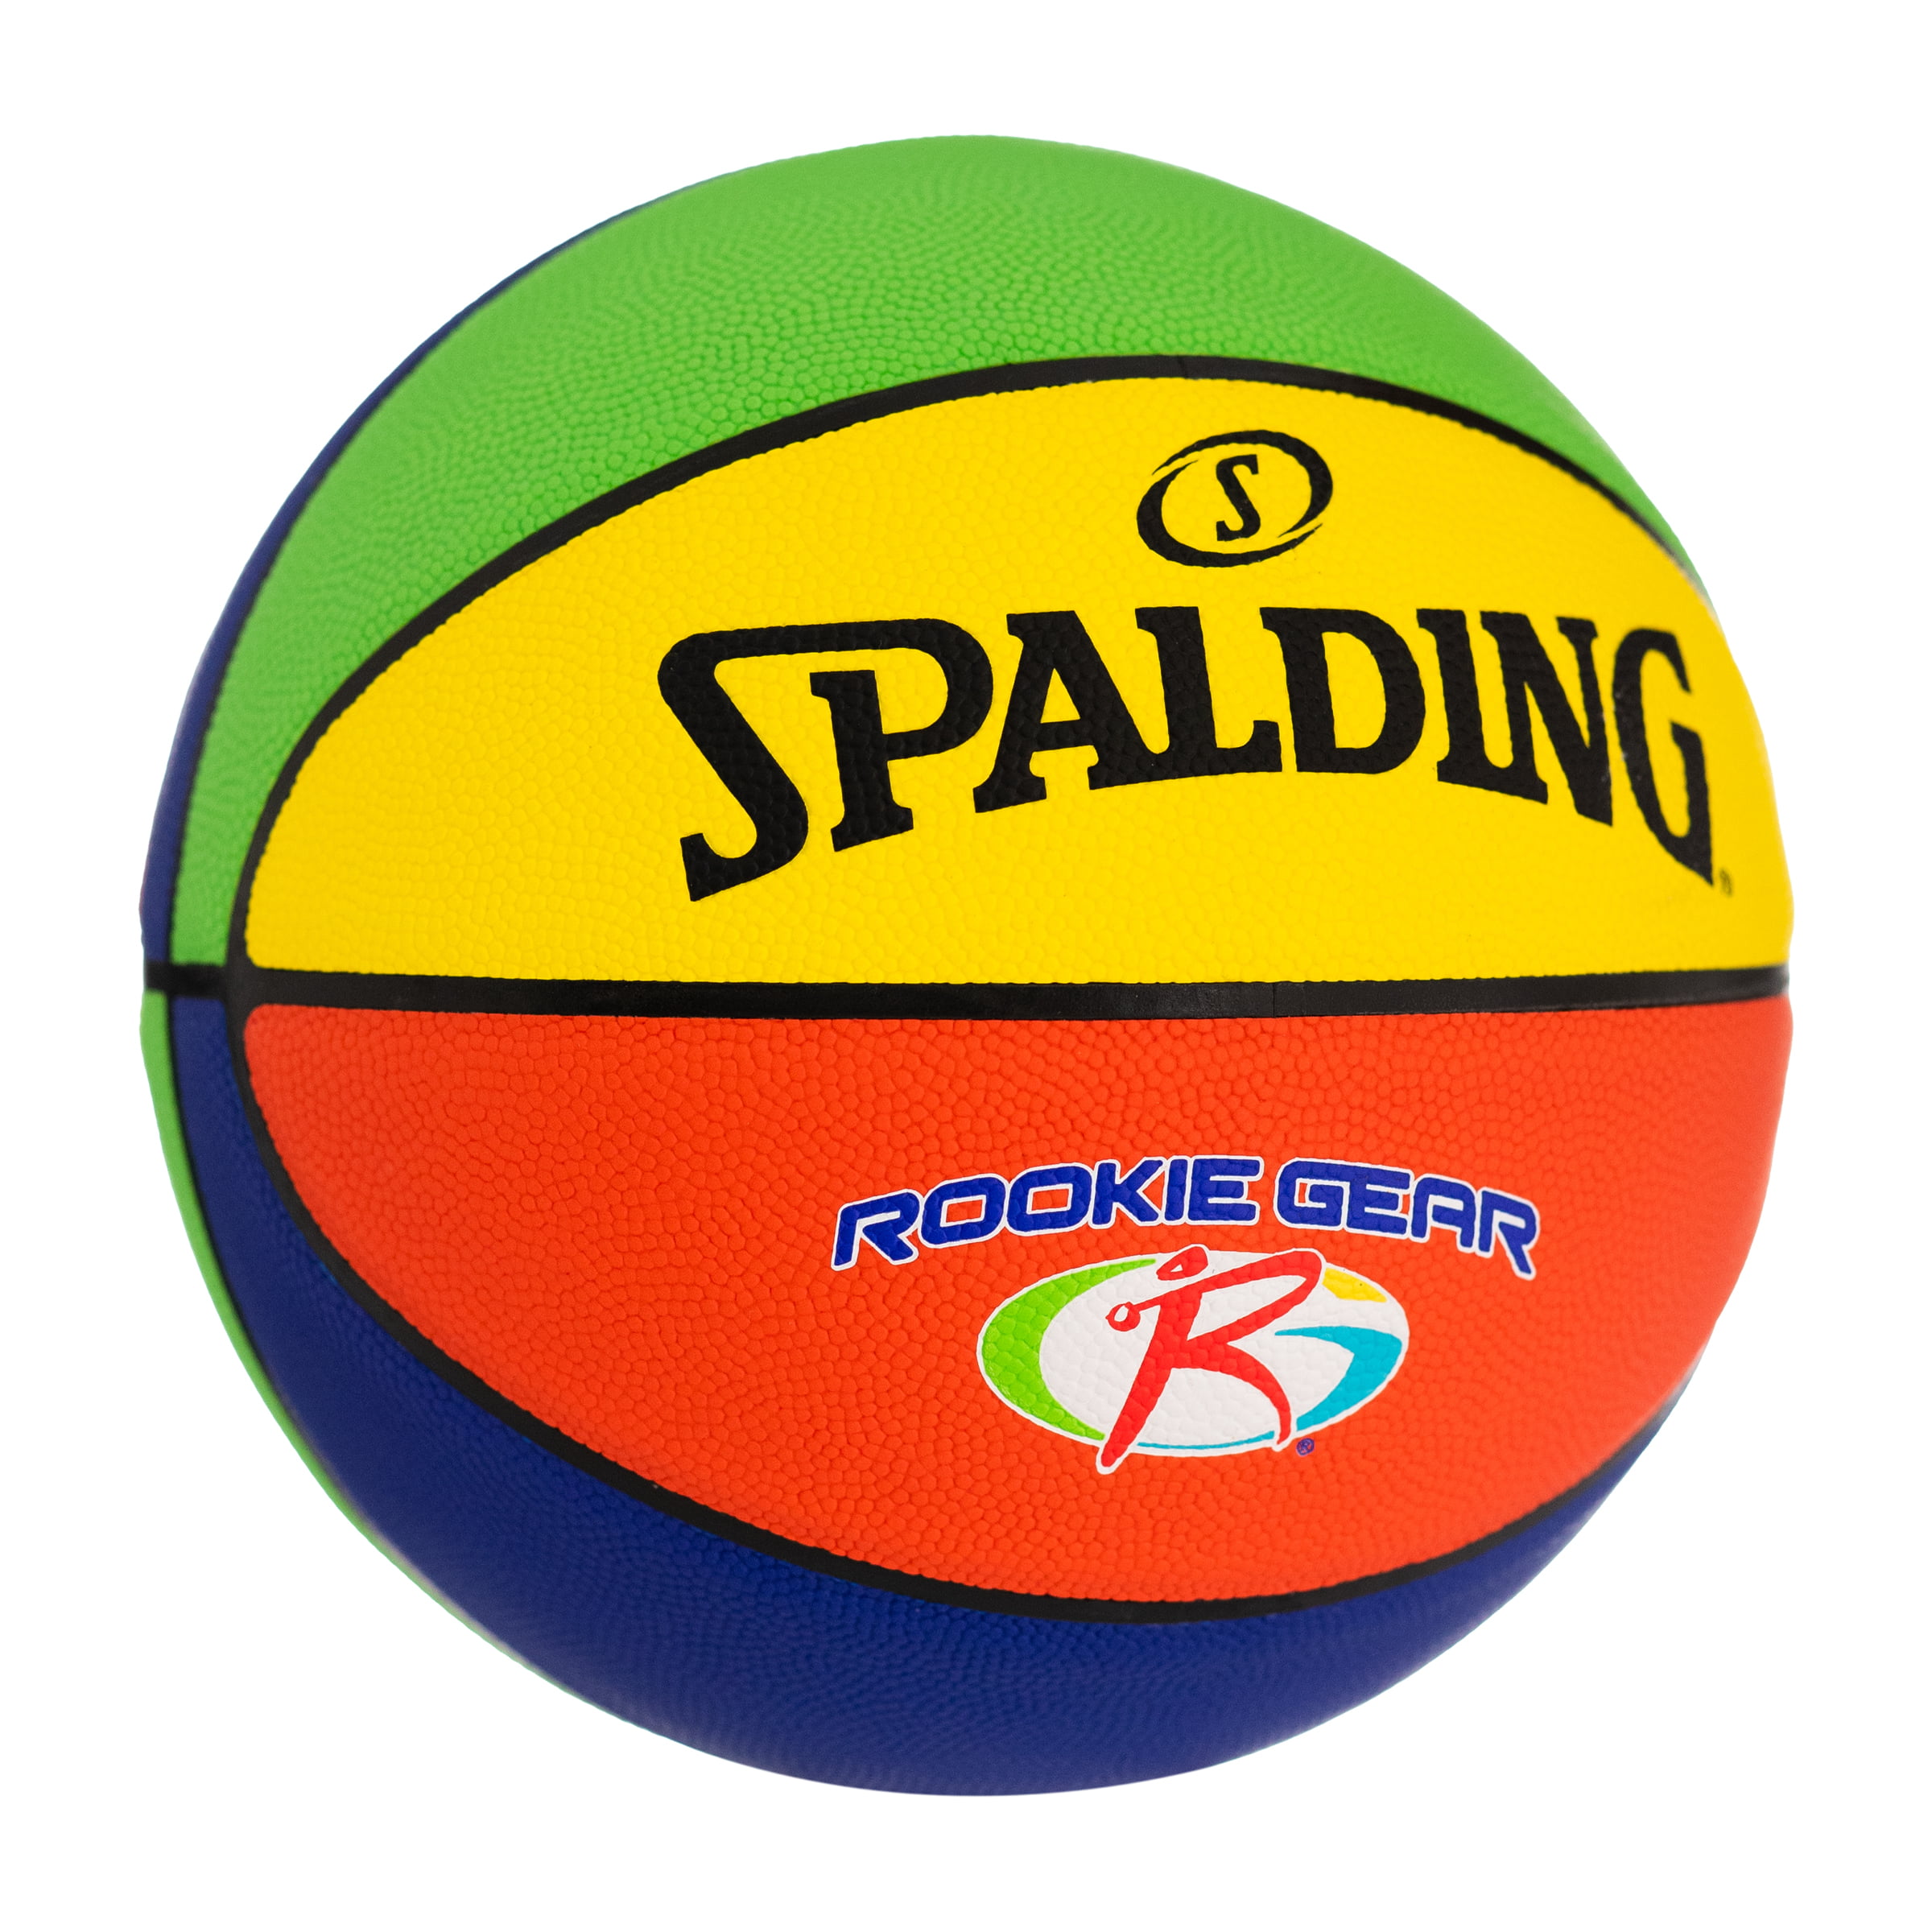 Spalding 1273274 Rookie Gear Basketball - Brown, 1 - Fry's Food Stores